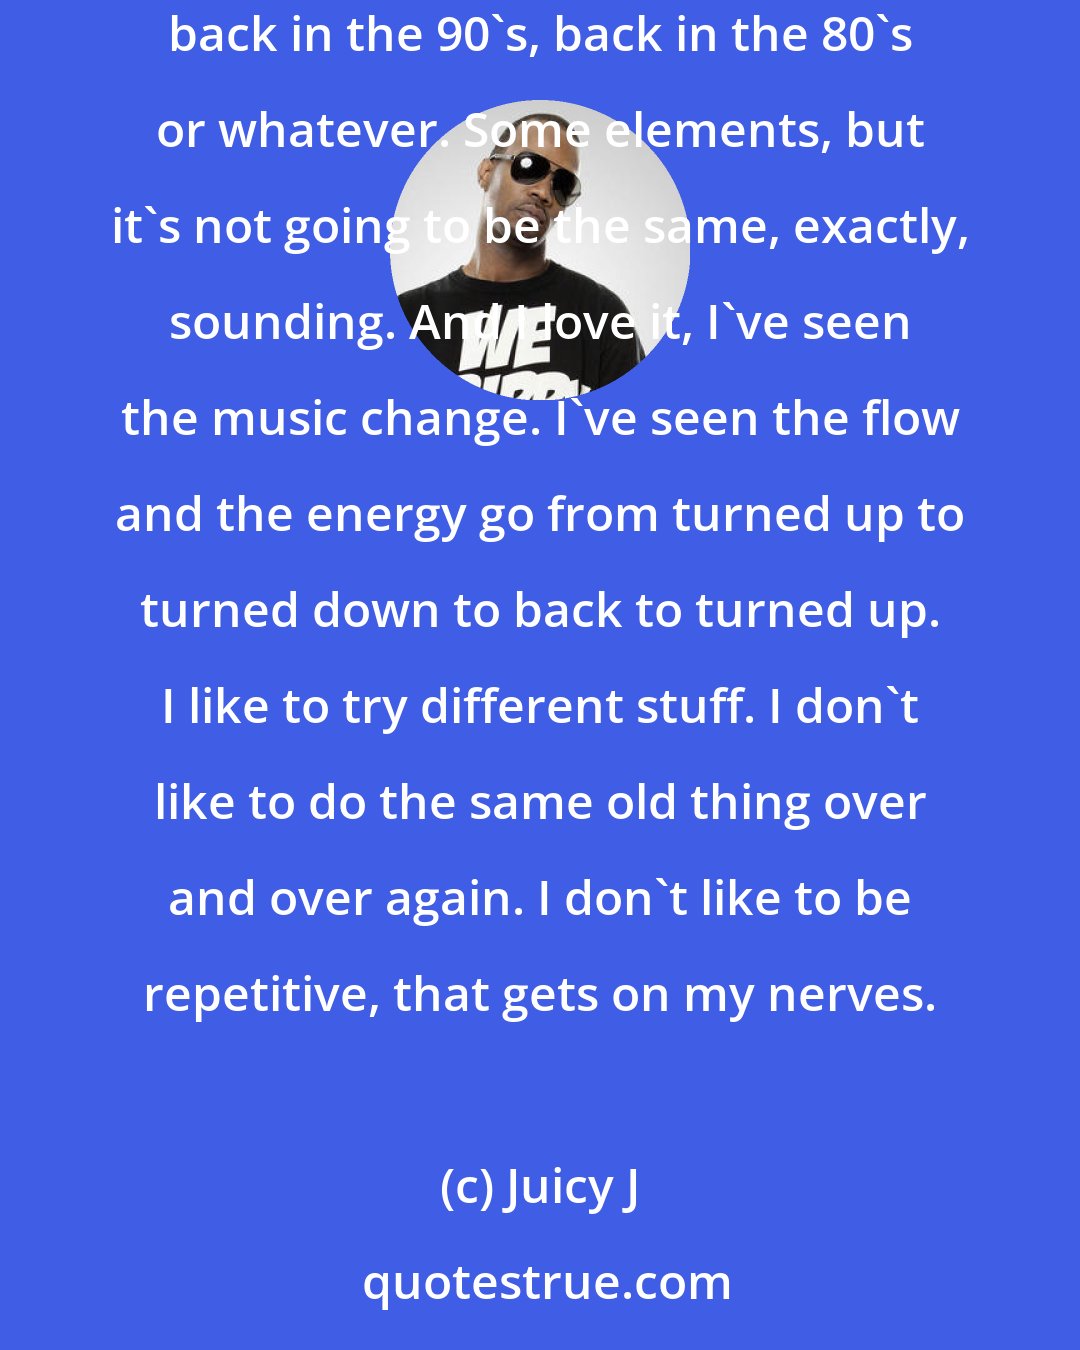 Juicy J: Nothing is going to stay the same; nothing's gonna sound like in 1952. There's some stuff that has some elements of back in the day, like back in the 90's, back in the 80's or whatever. Some elements, but it's not going to be the same, exactly, sounding. And I love it, I've seen the music change. I've seen the flow and the energy go from turned up to turned down to back to turned up. I like to try different stuff. I don't like to do the same old thing over and over again. I don't like to be repetitive, that gets on my nerves.